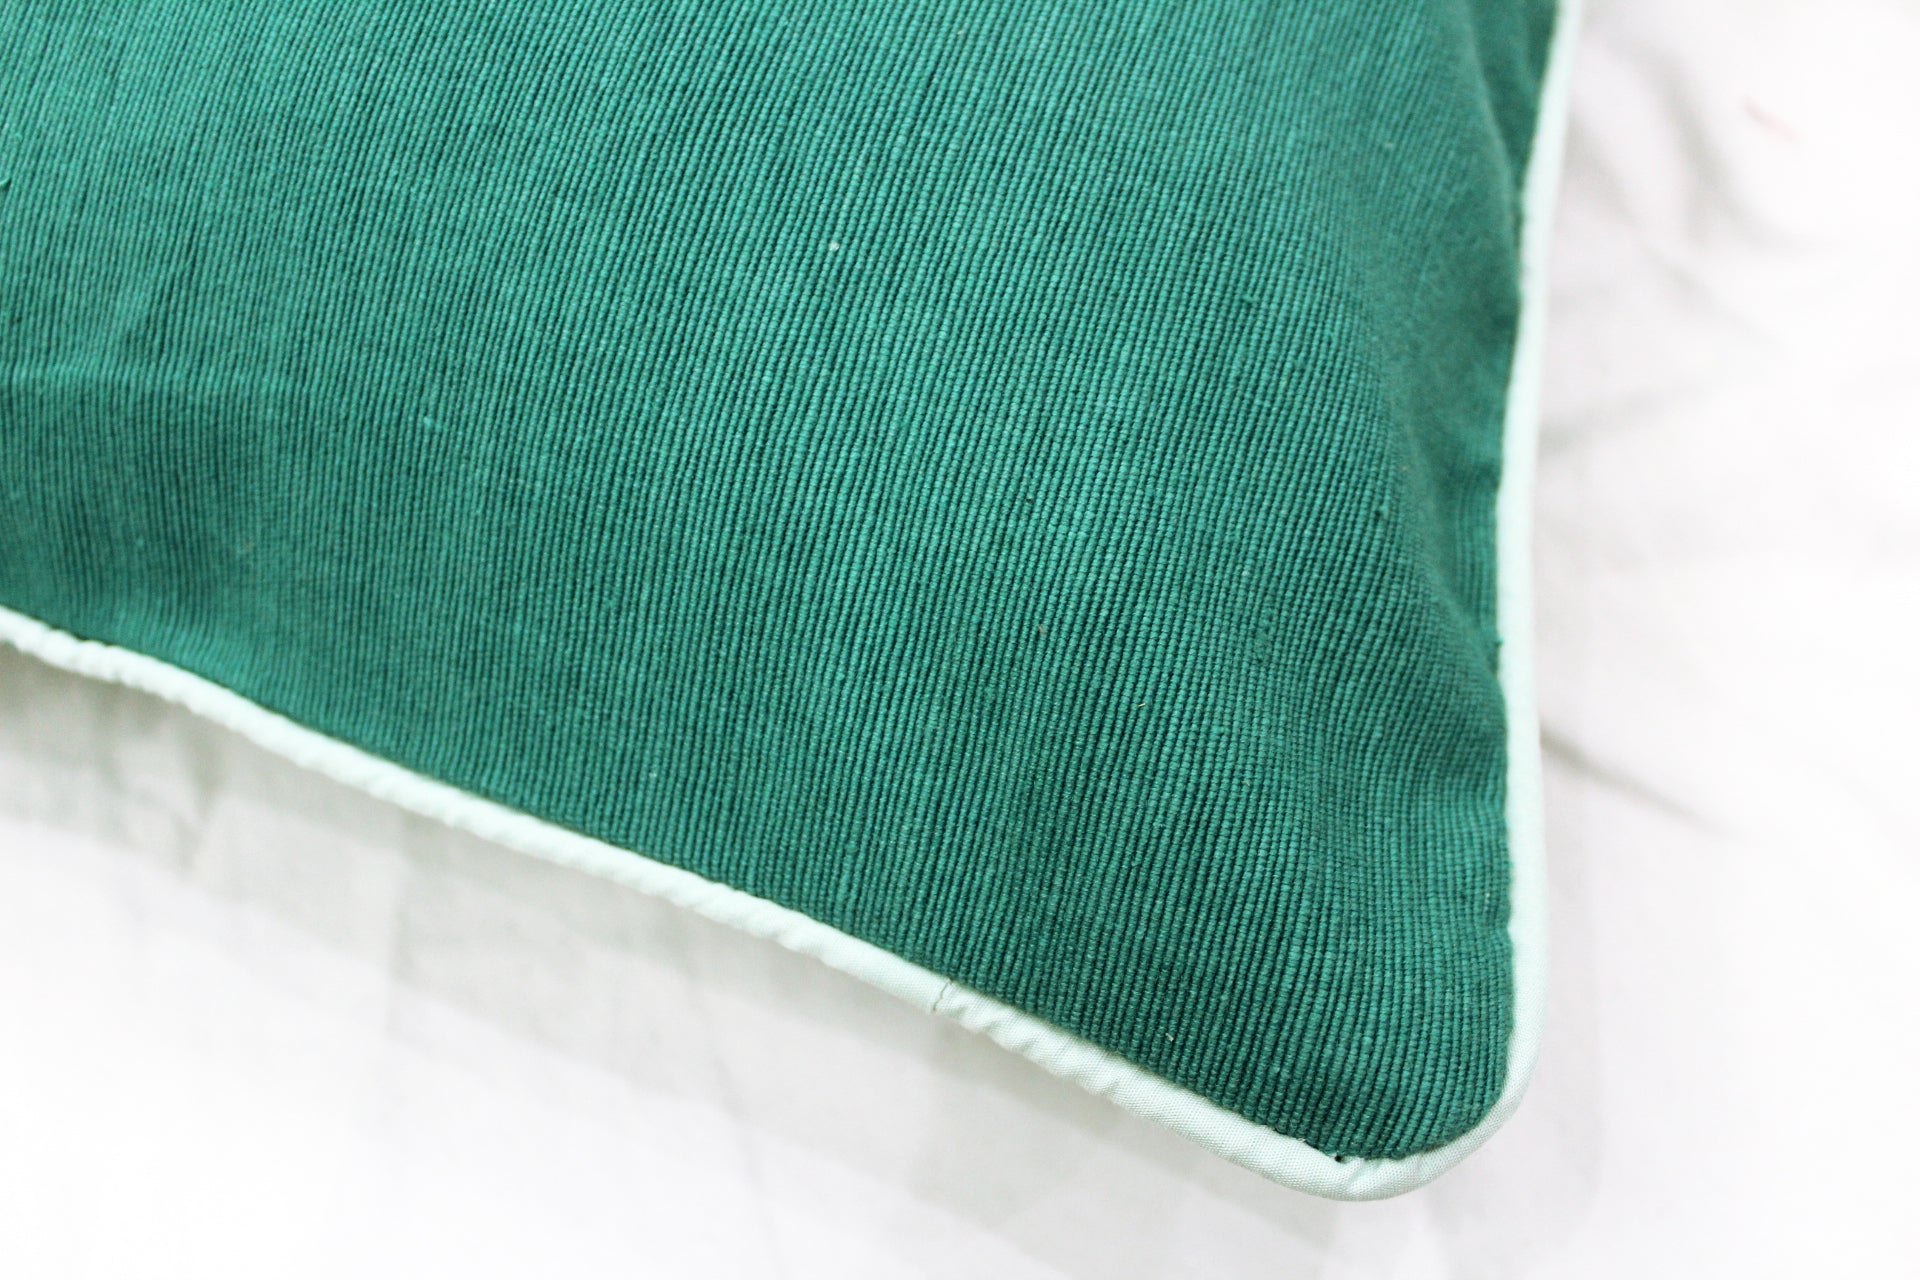 Soft Woven Corded Stripe Cotton Cushion Cover Set in Bottle Green online (1Pc)